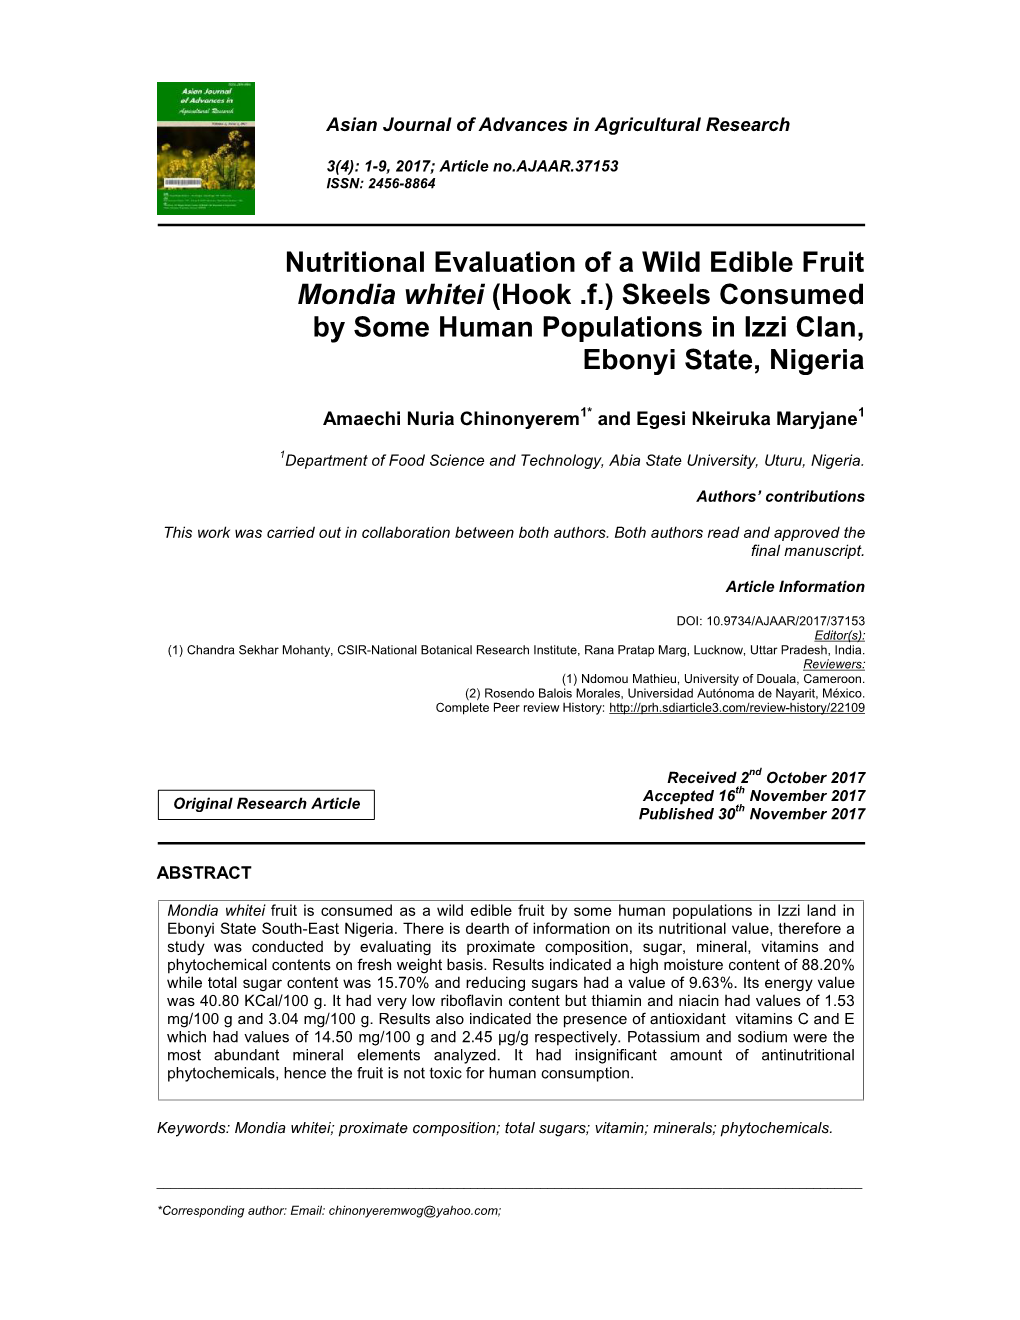 Nutritional Evaluation of a Wild Edible Fruit Mondia Whitei (Hook .F.) Skeels Consumed by Some Human Populations in Izzi Clan, Ebonyi State, Nigeria